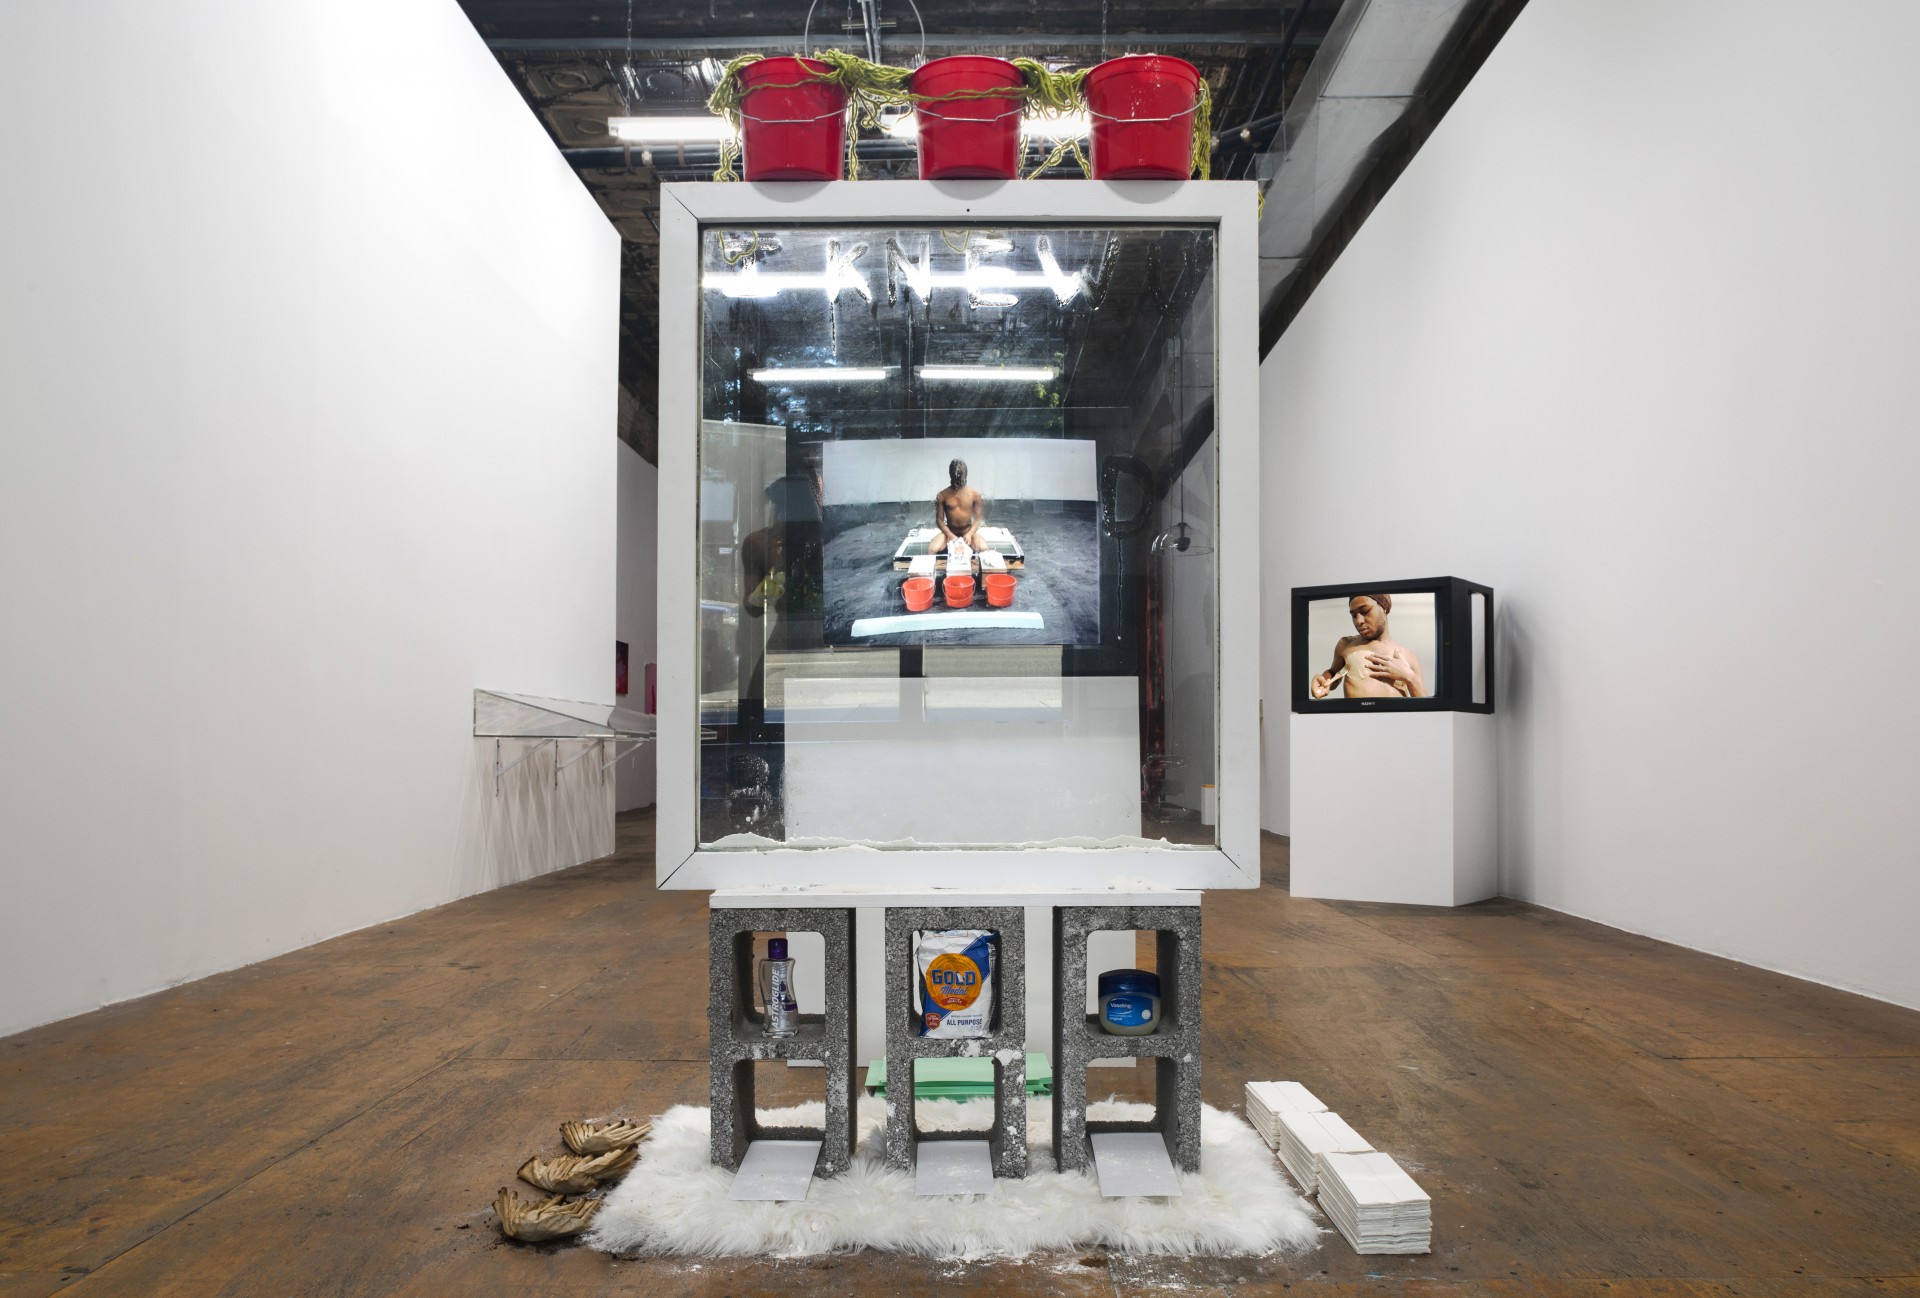 *Window View: Covered in Lube*, 2014–16, 2021, in *Keioui Keijaun Thomas: Hands Up, Ass Out*, curated by Shehab Awad as Executive Care\*, 2021 at Participant Inc, New York. Photo: Daniel Kukla.